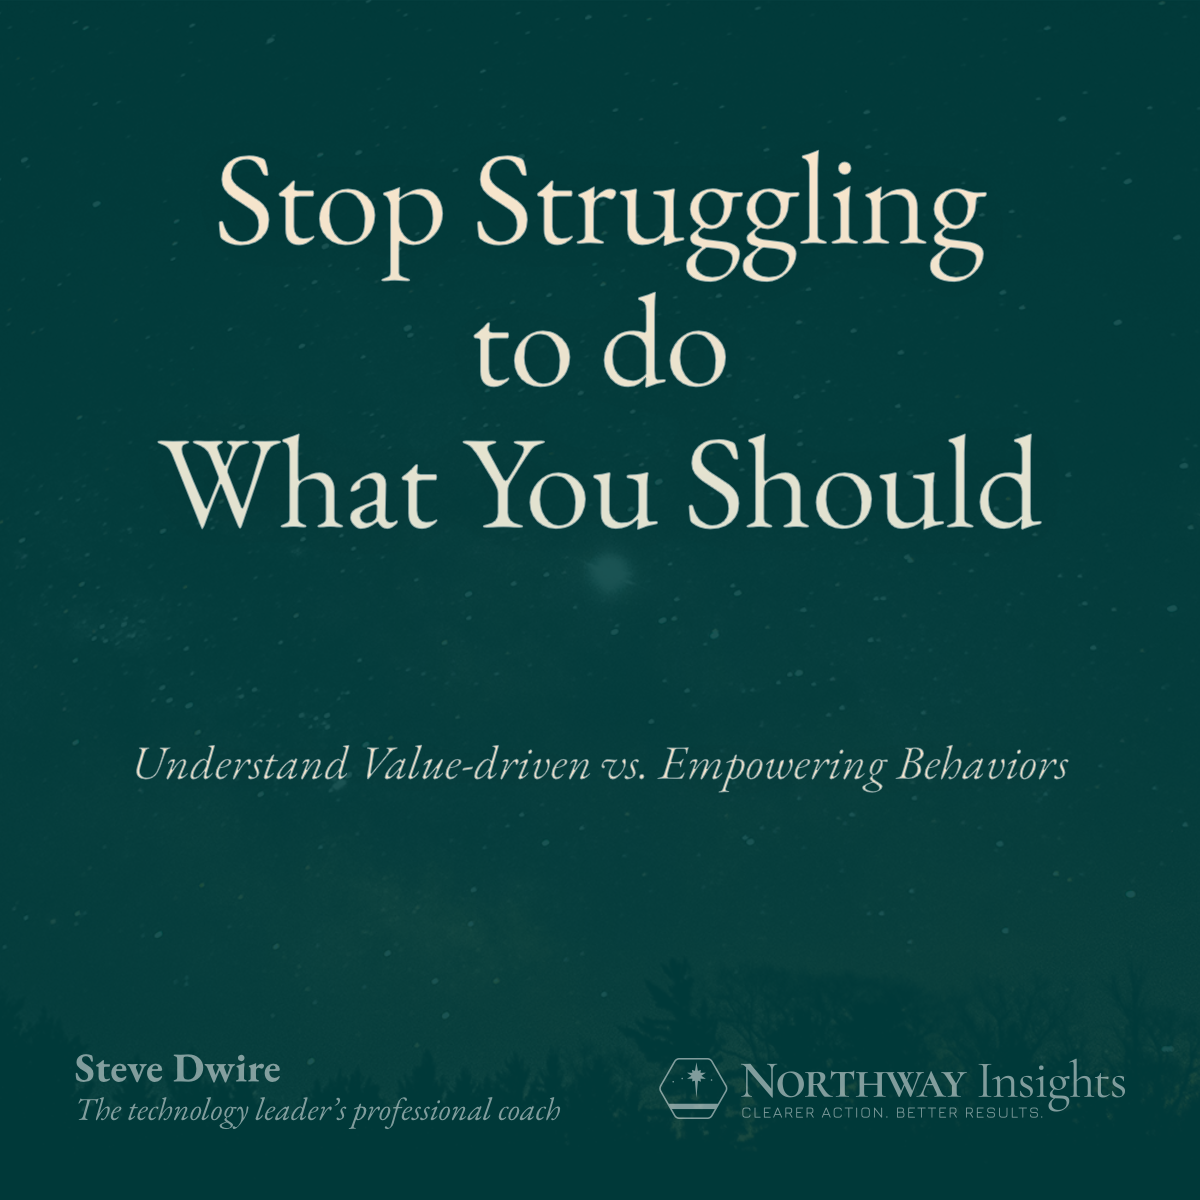 Stop Struggling to do What You Should (Understand Value-Driven vs. Empowering Behaviors)